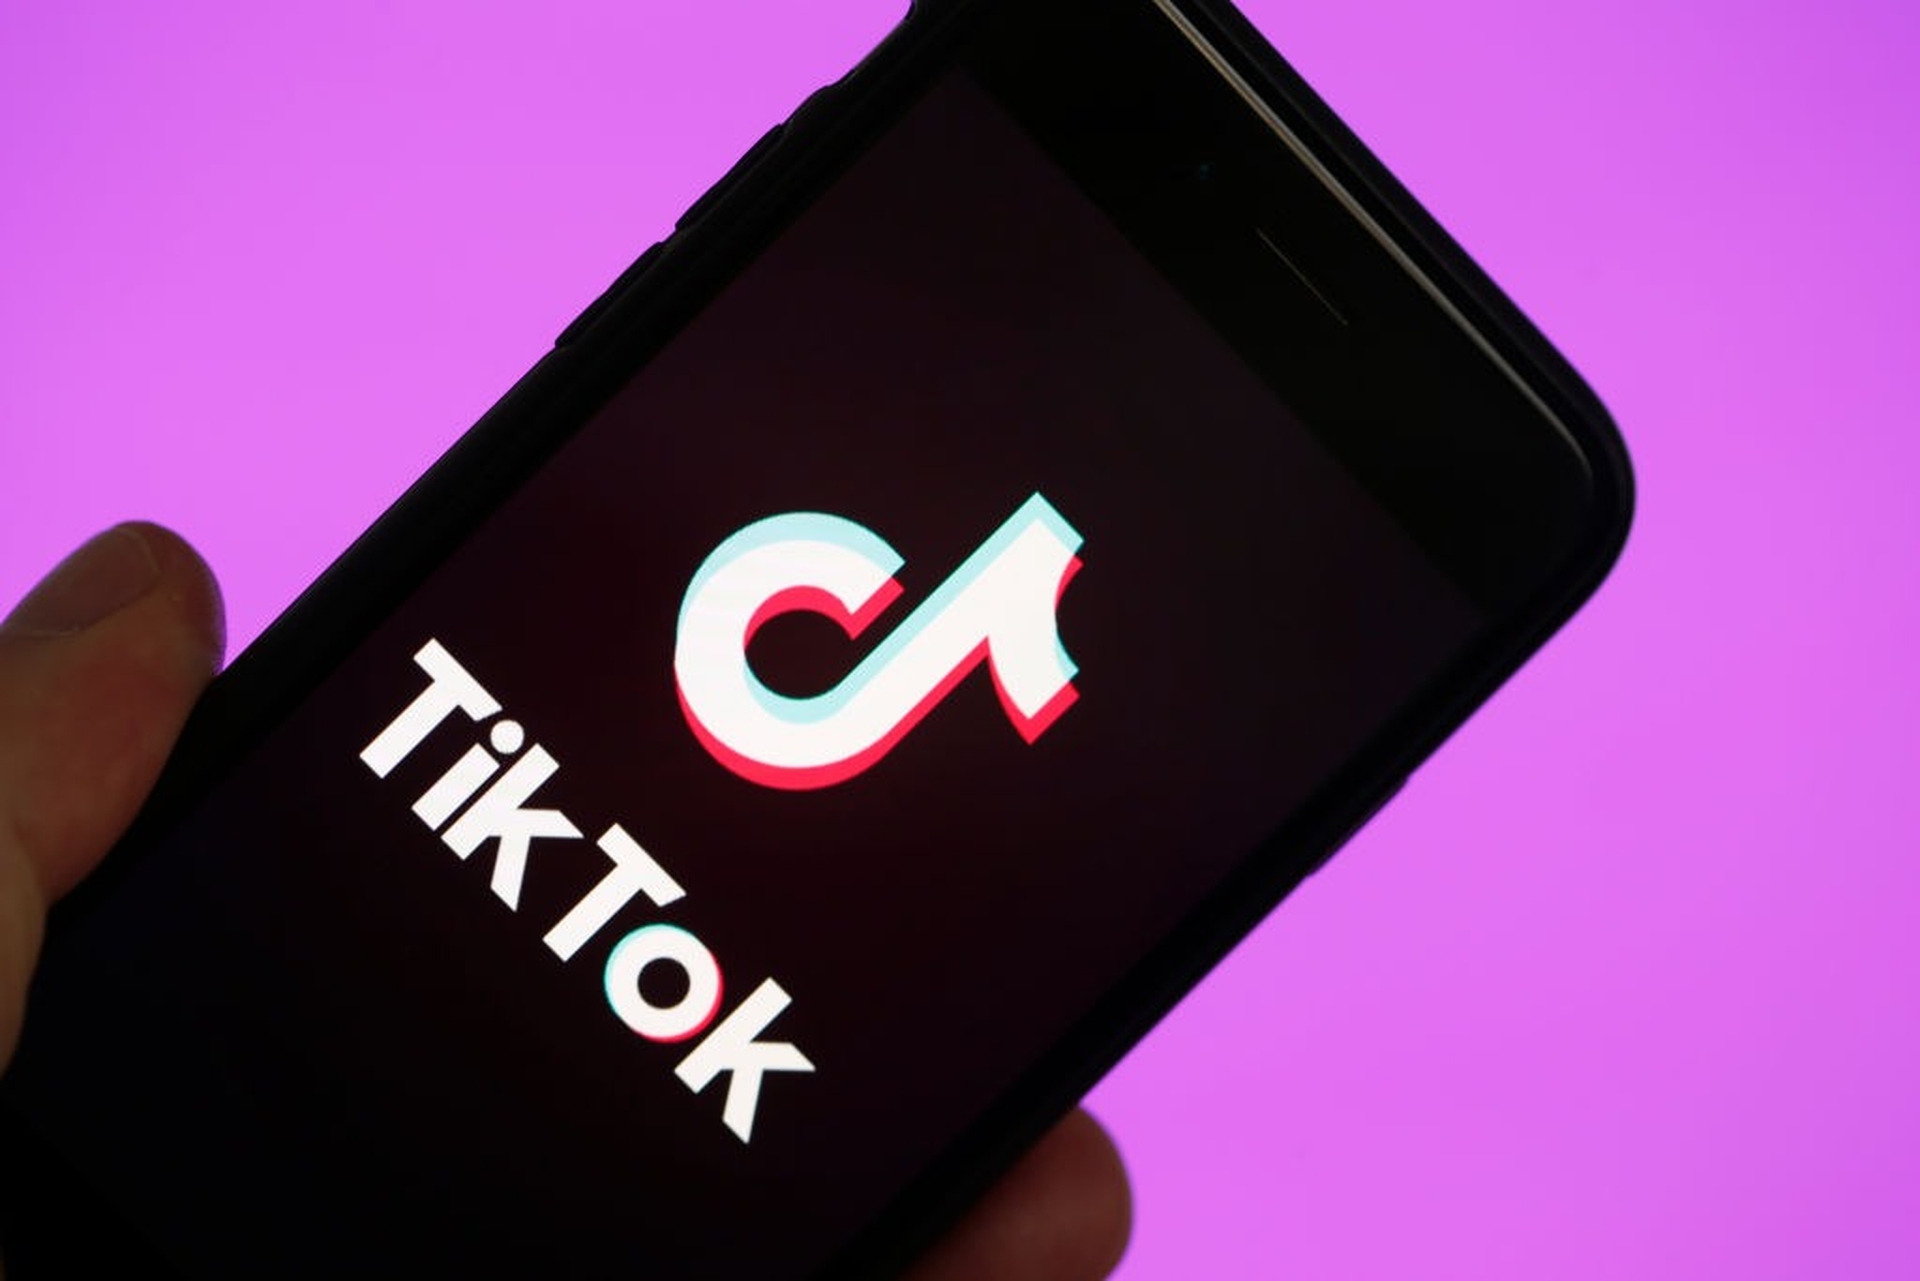 Today, we are going to cover how to get celebrity look alike filter TikTok, so you can prove to your friends how much you look like your favorite celebrity.